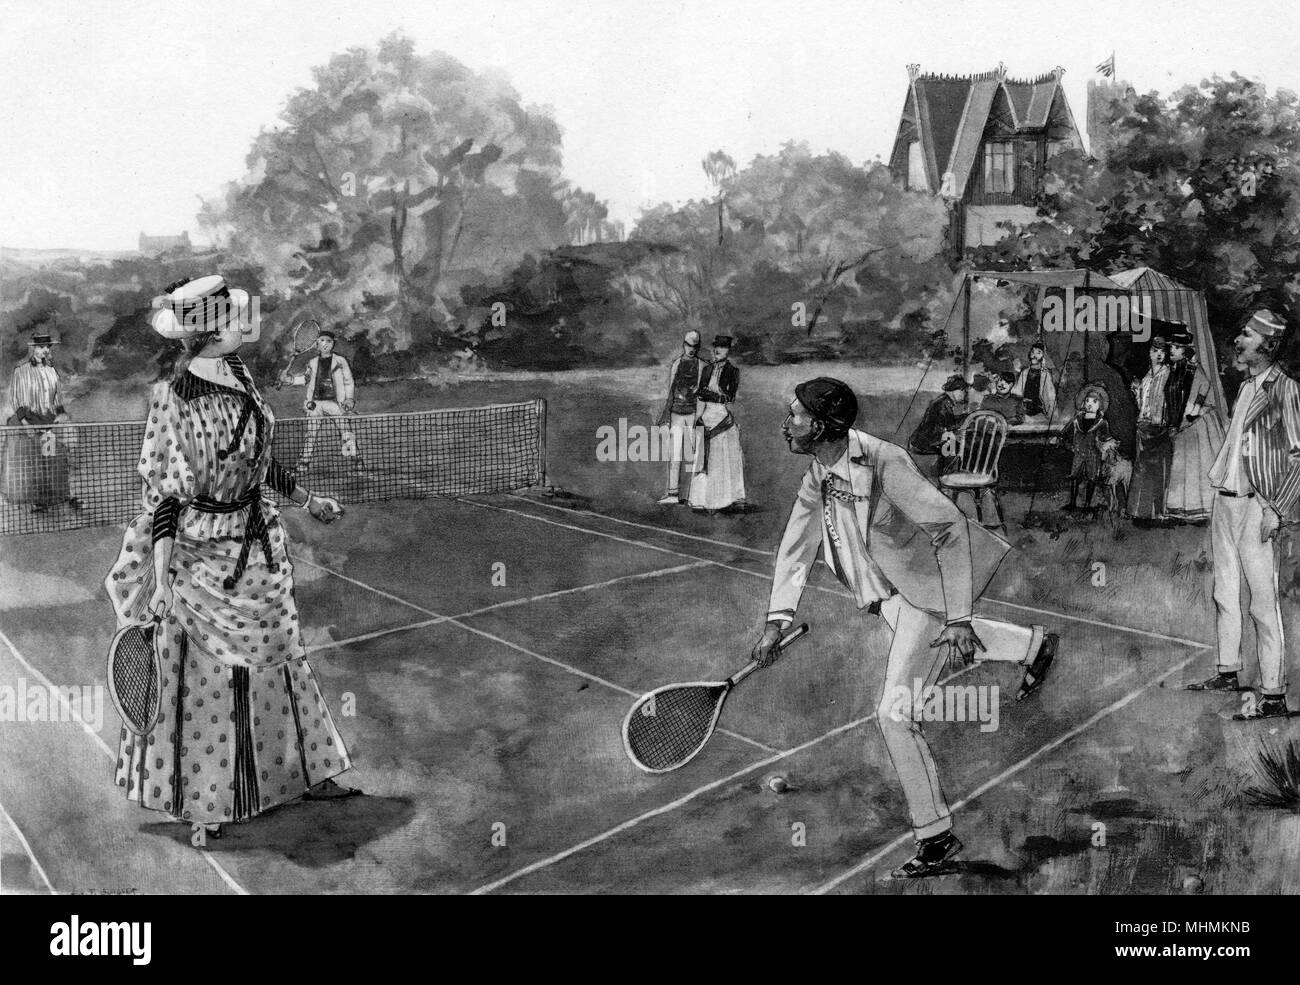 Tennis party Black and White Stock Photos & Images - Alamy